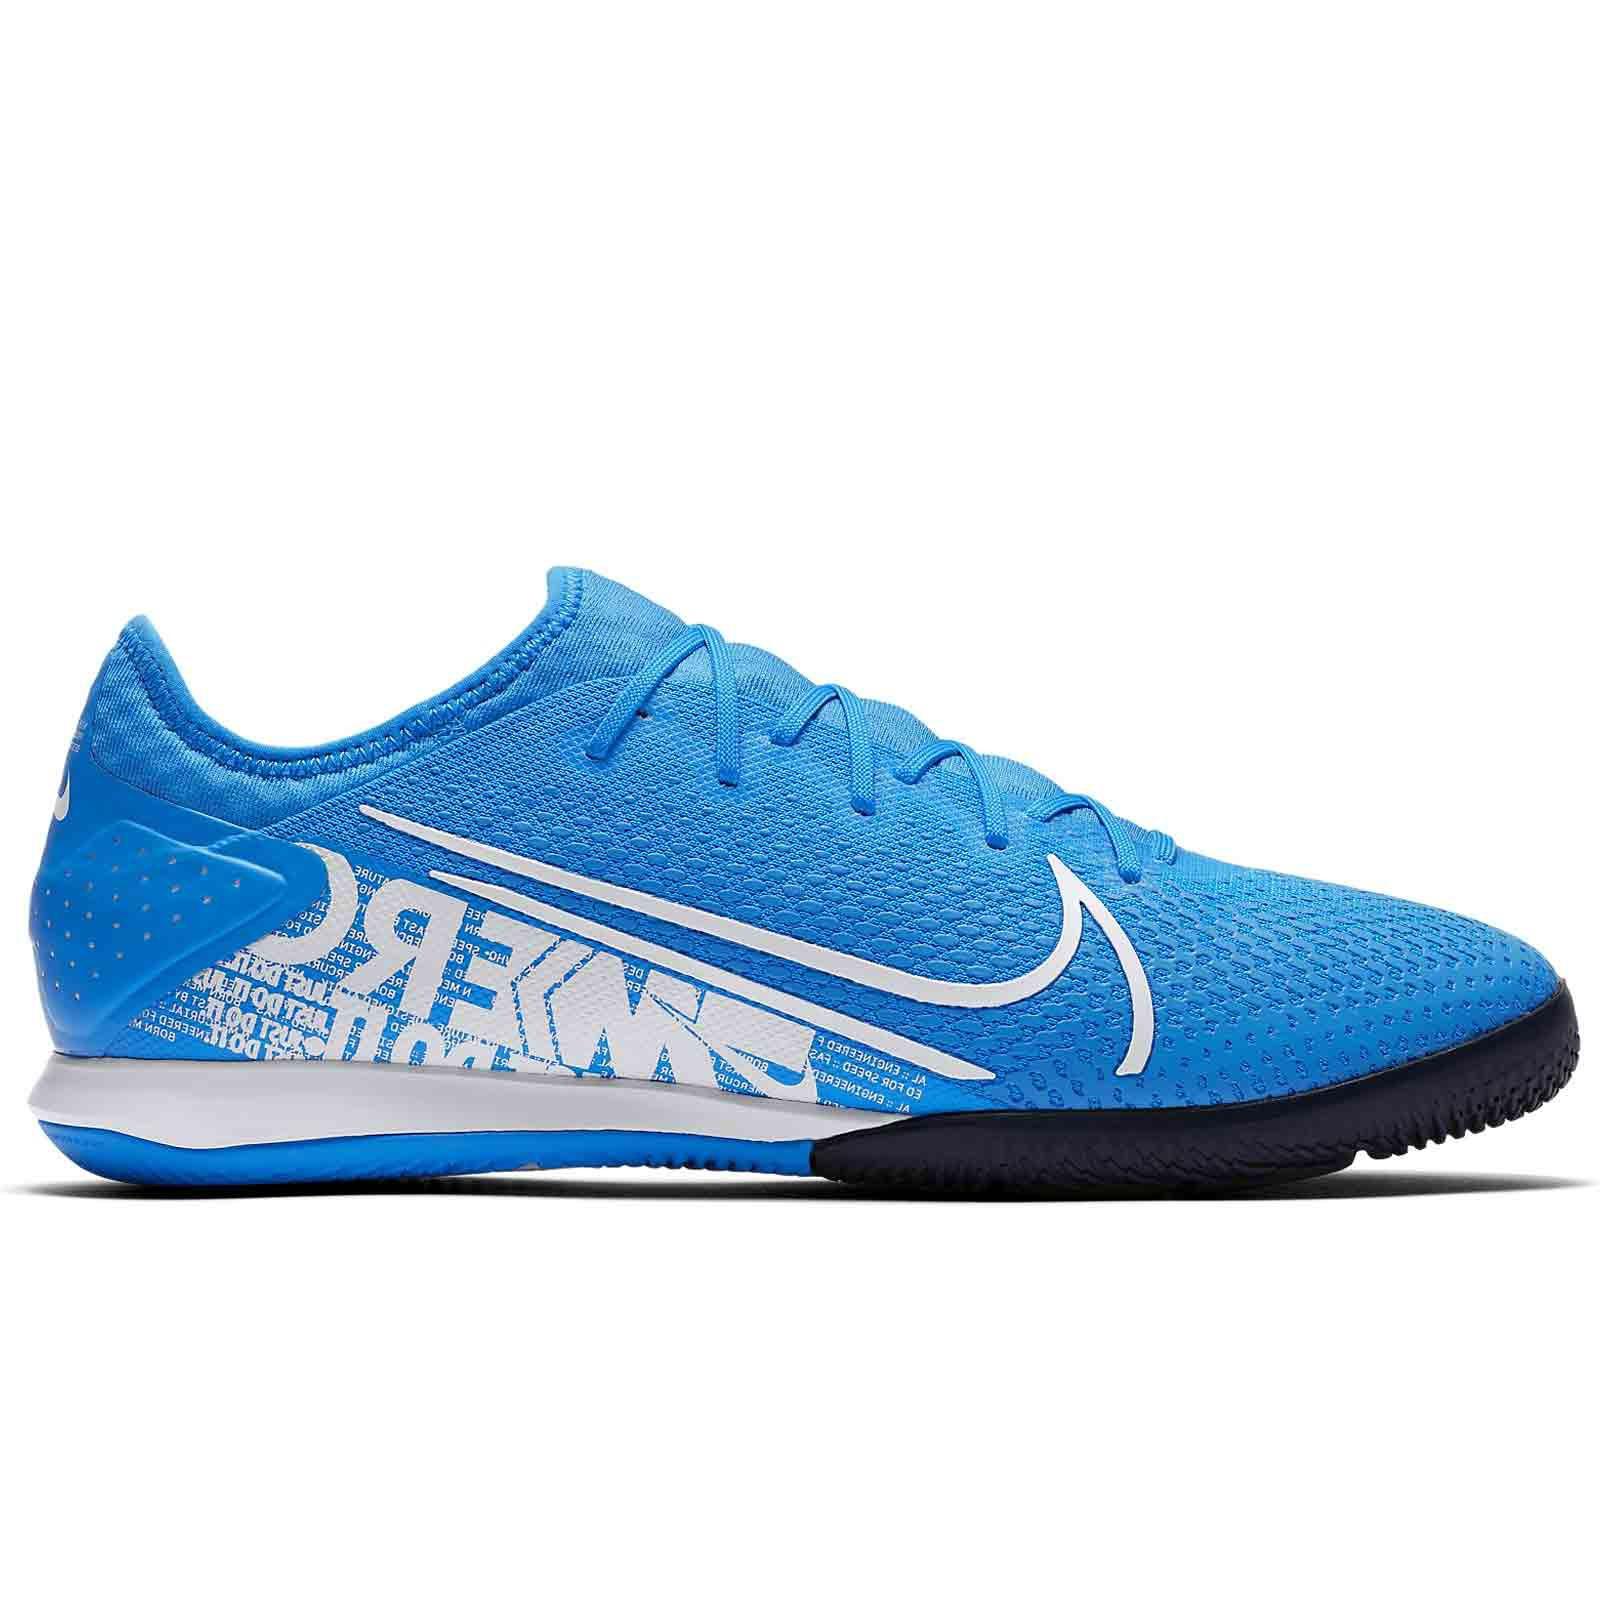 Nike Magistax Proximo II Dynamic Fit Turf Shoes [Total